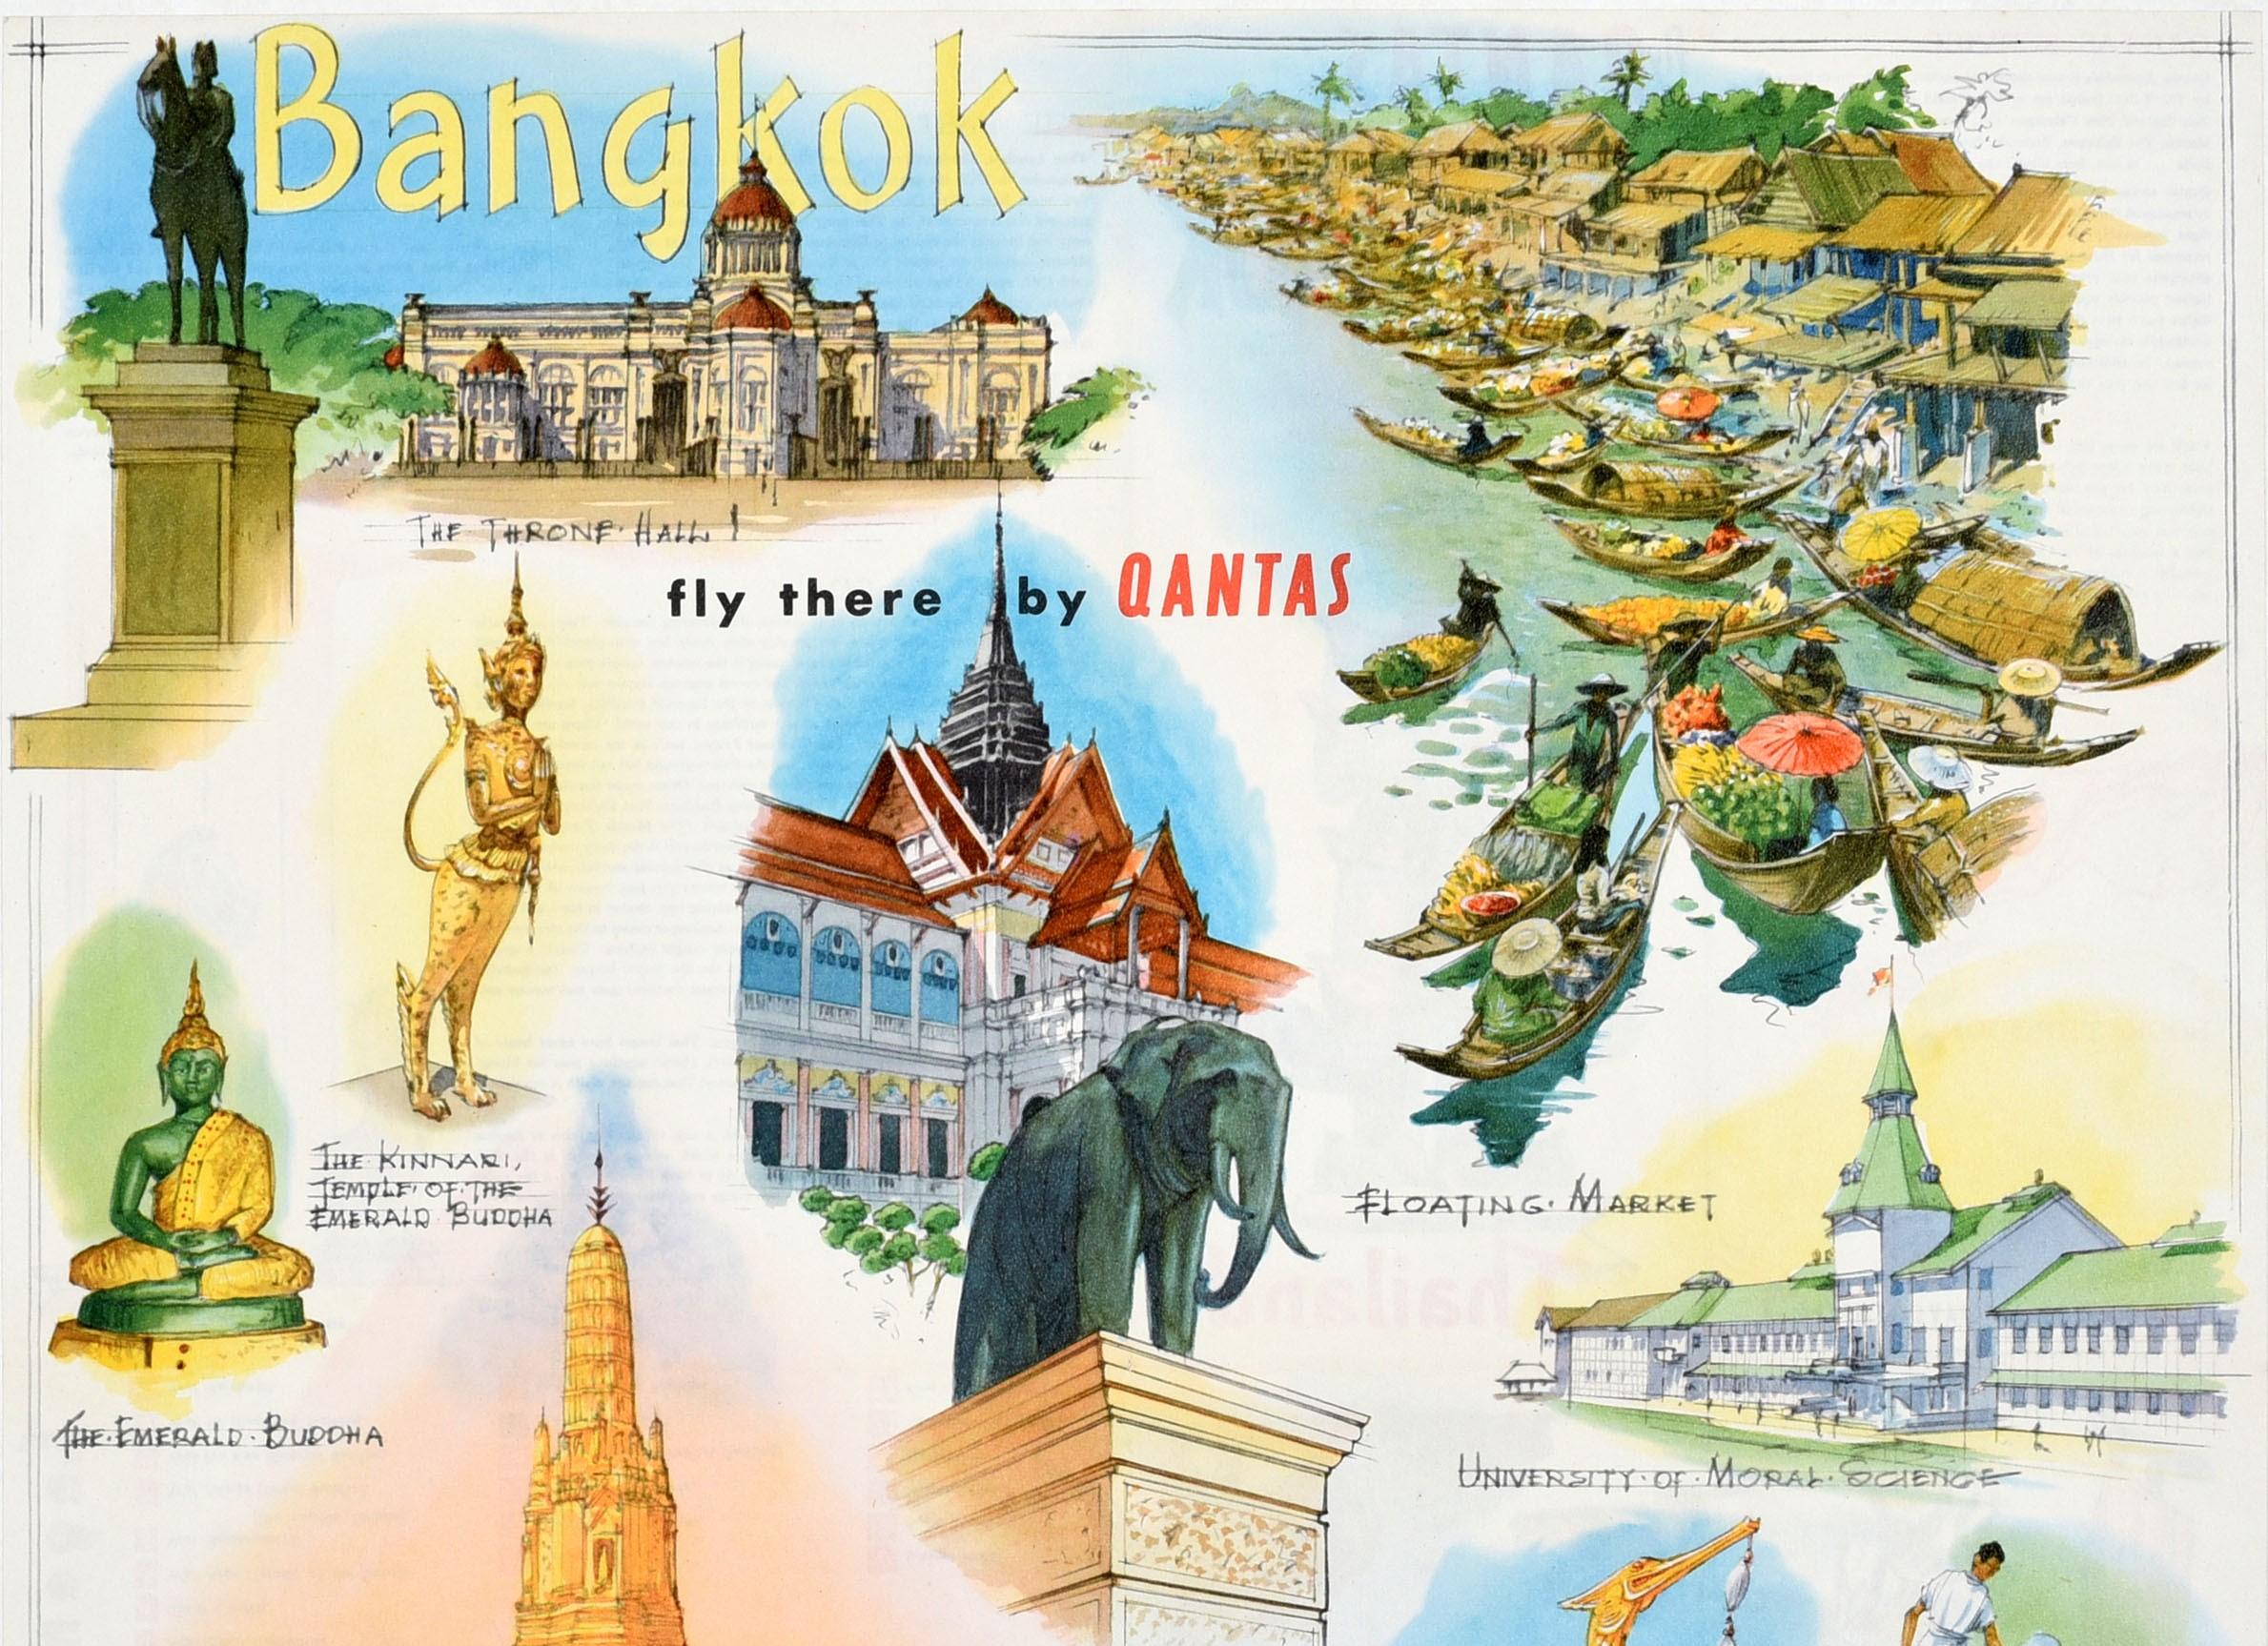 Original vintage travel brochure poster for Bangkok fly there by Qantas featuring colourful scenic illustrations of notable and historic places and views including buddhist temples and a classical dancer in traditional costume, a royal state barge